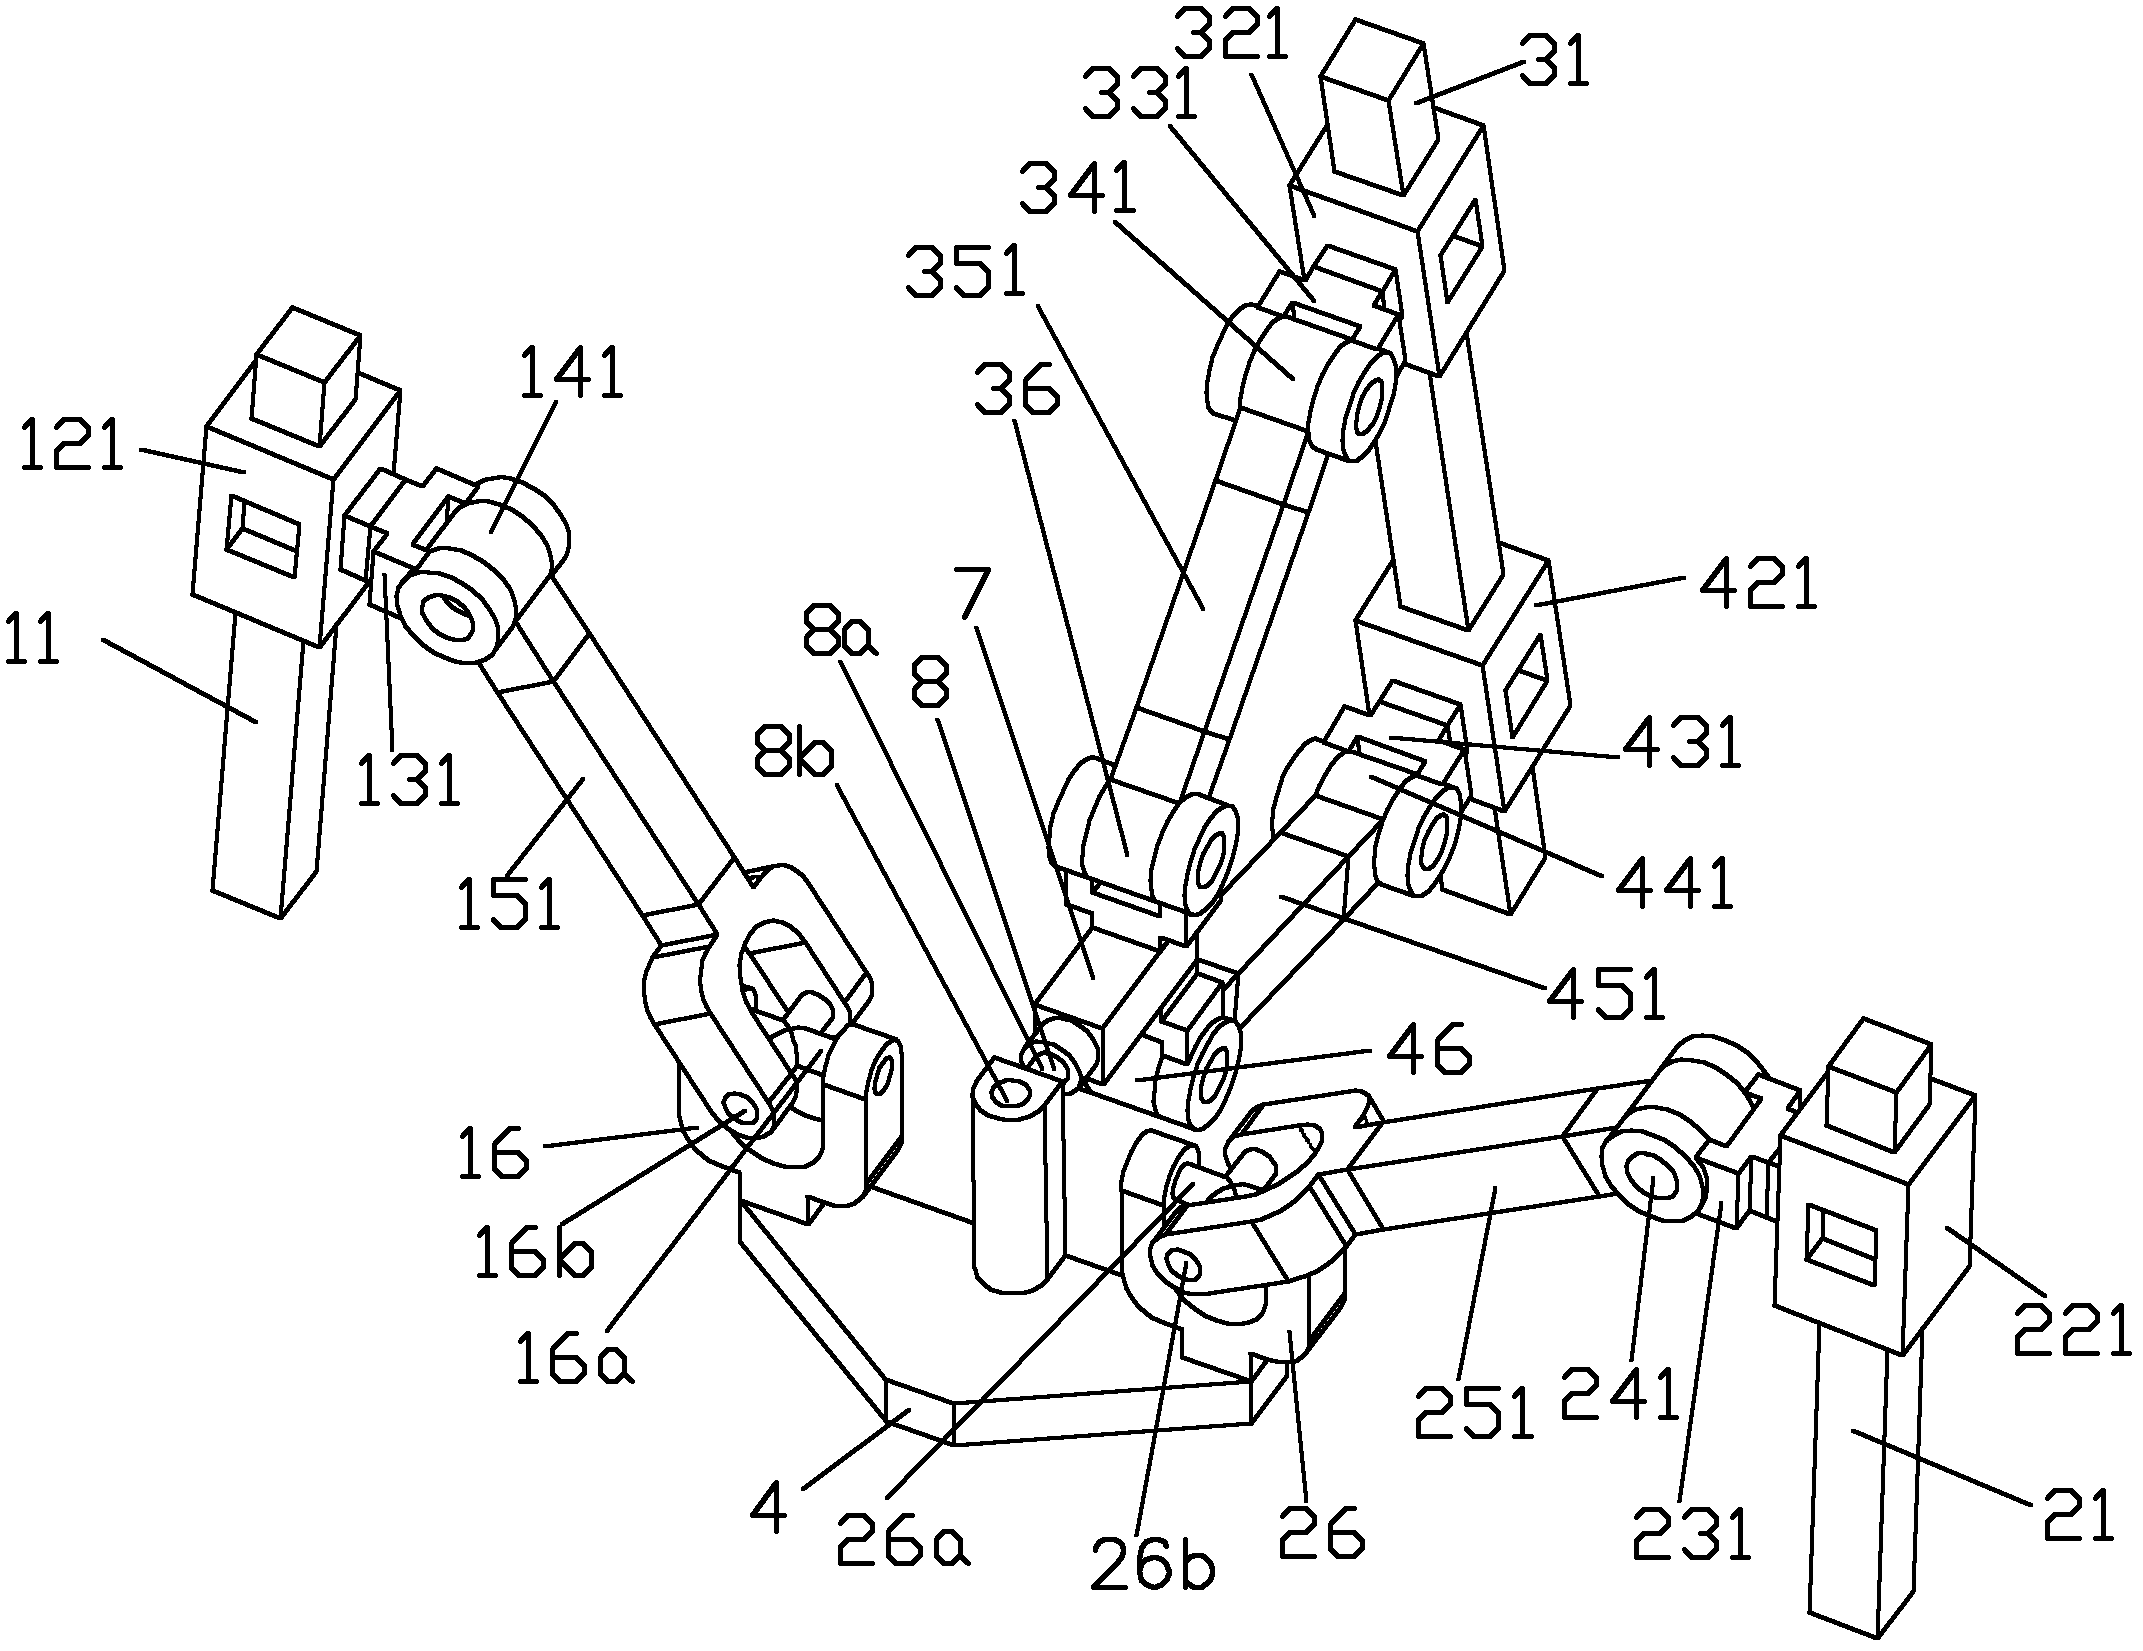 High-rigidity redundantly-actuated three-degree-of-freedom parallel mechanism